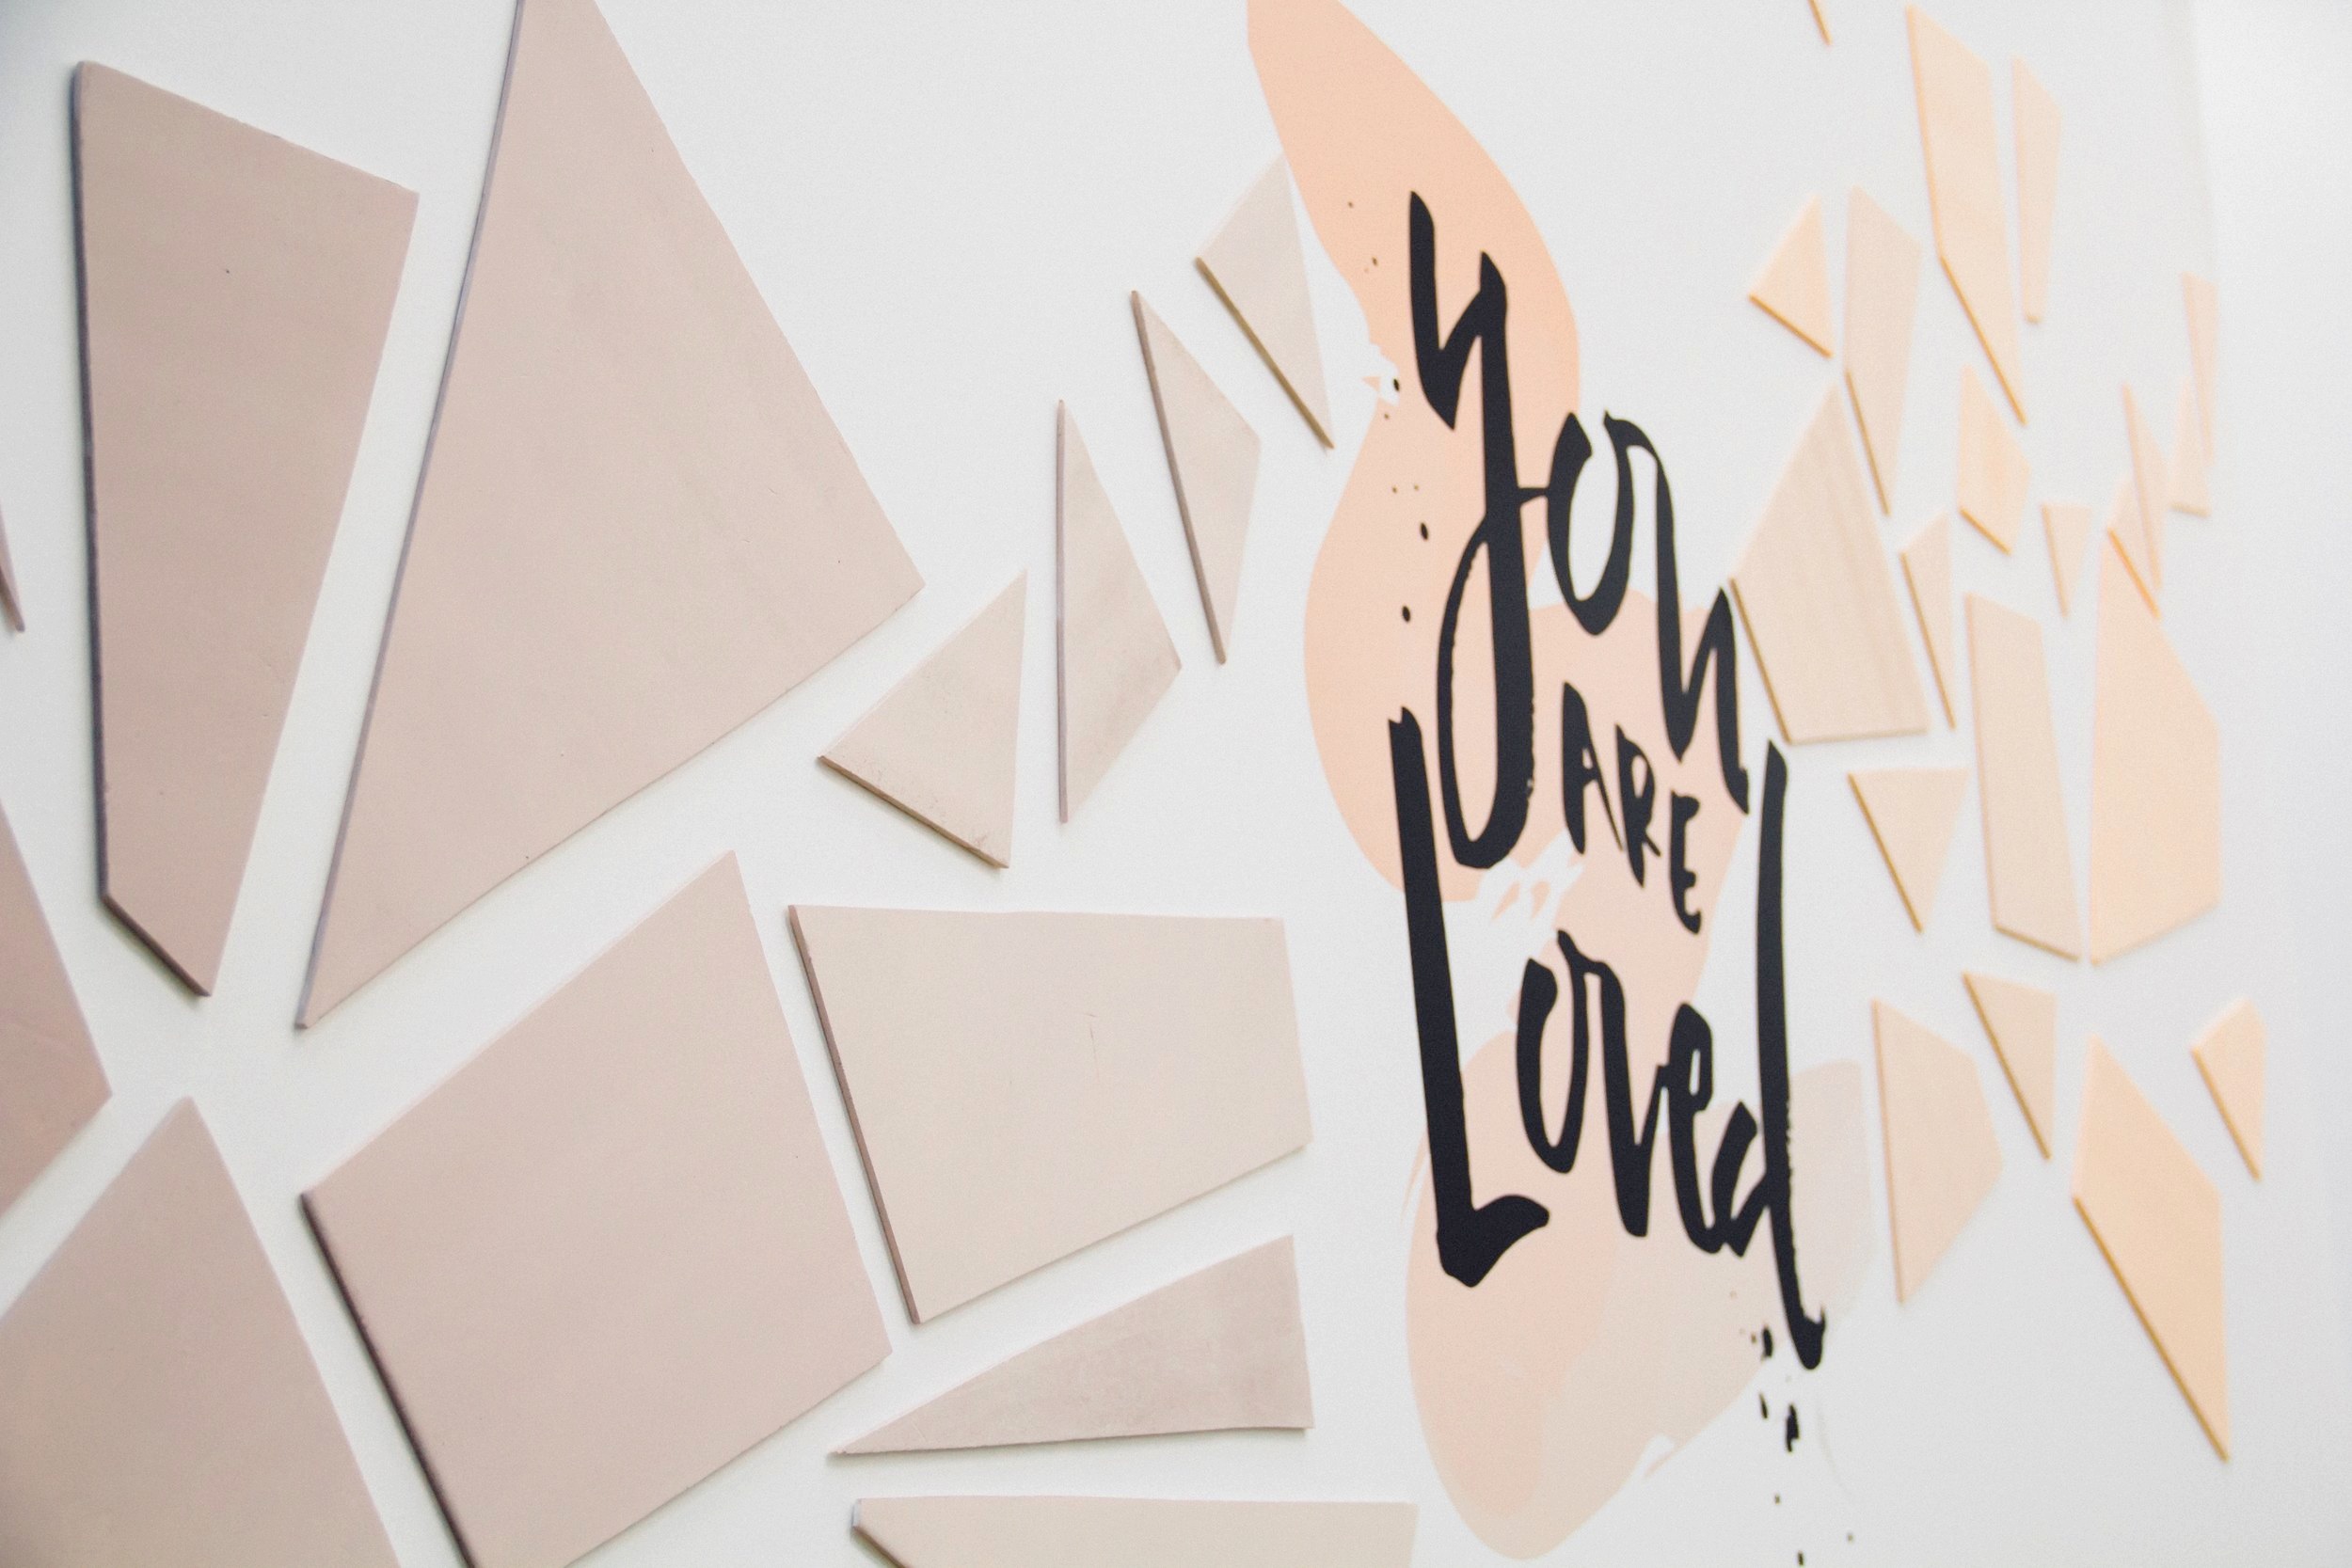 You Are Loved | Relevant + Raw Installation | @RelevantRaw